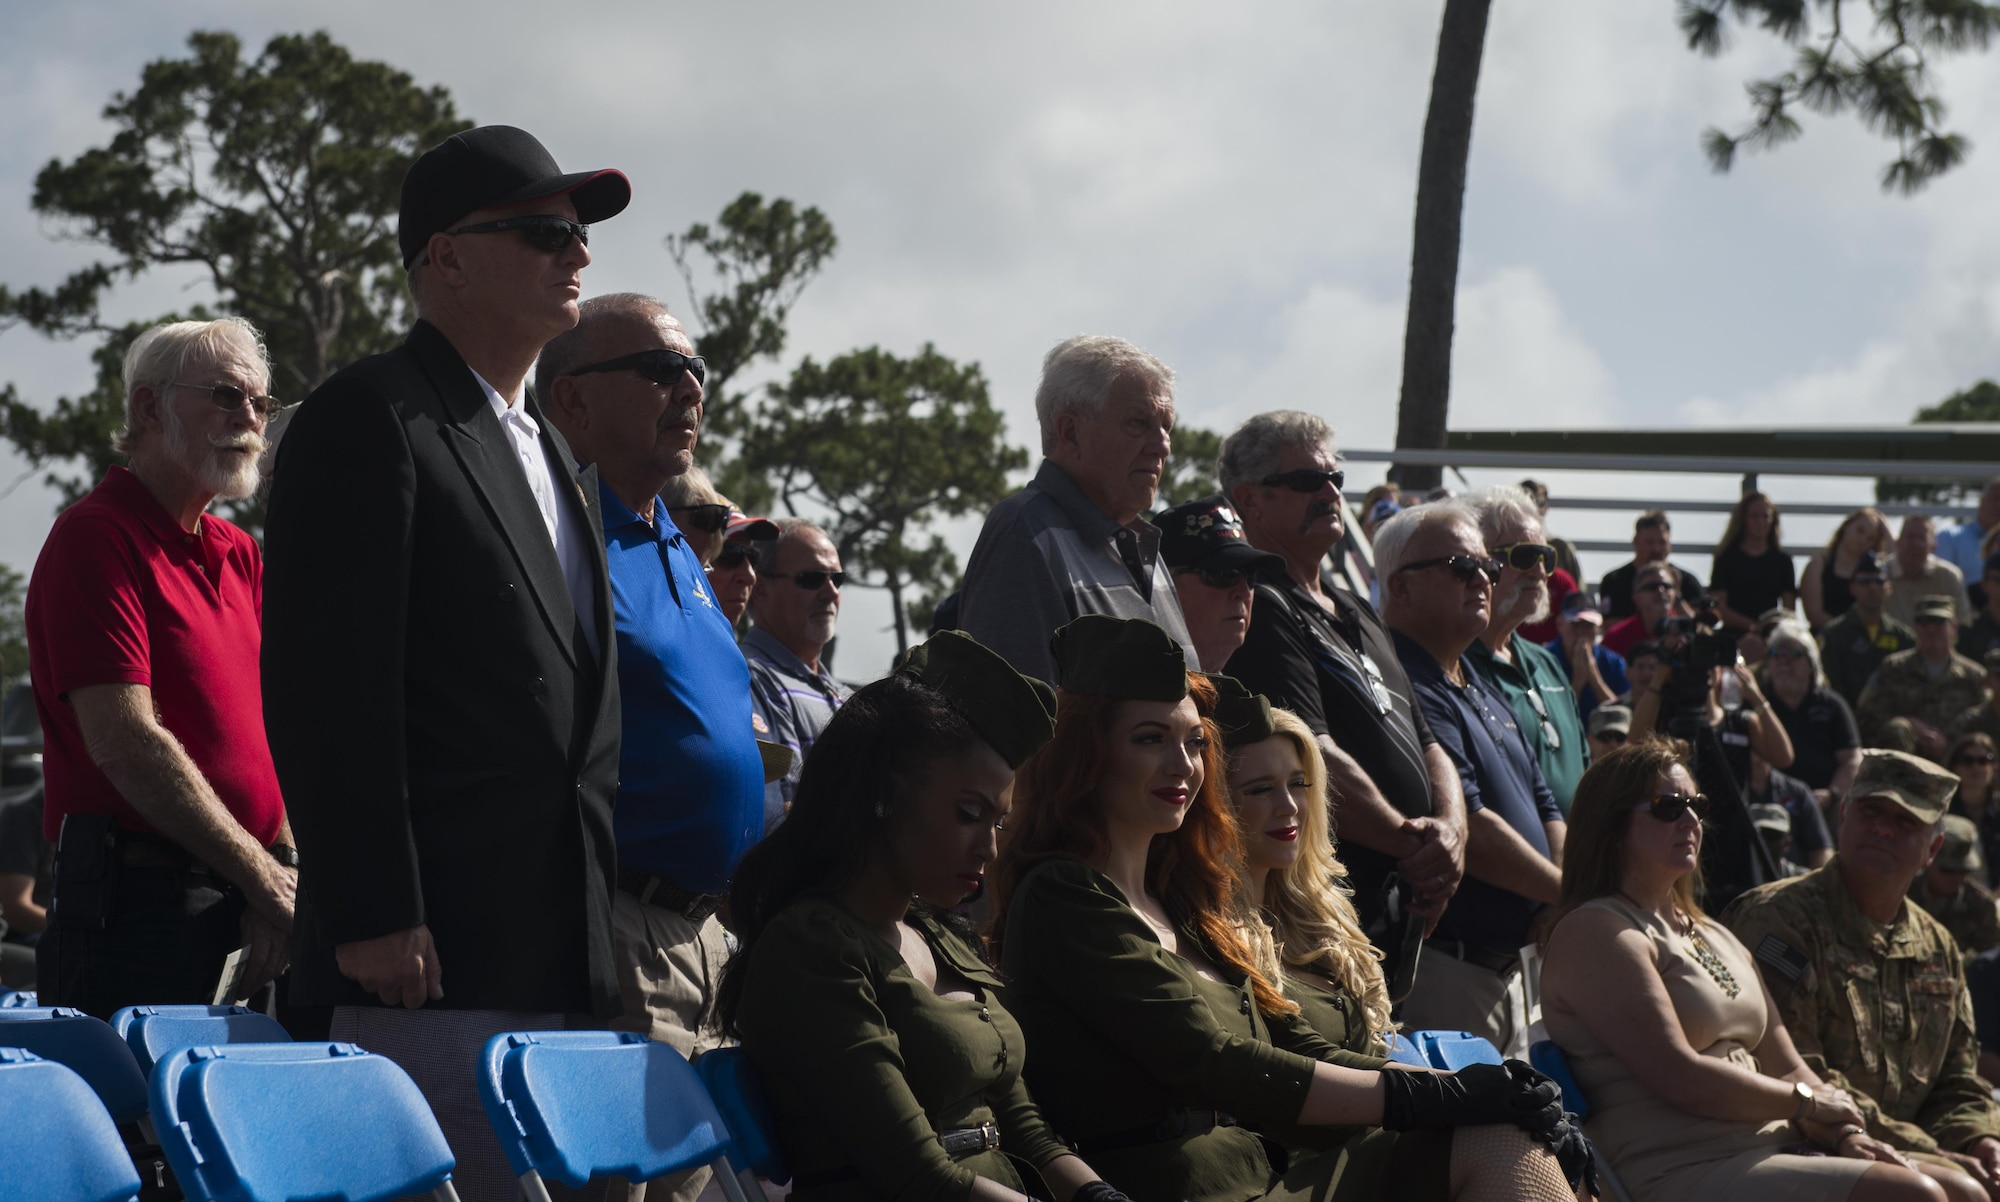 Veterans of Operation Eagle Claw stand as they are recognized during a memorial ceremony at Hurlburt Field, Fla., June 23, 2017. Operation Eagle Claw was an attempted rescue mission on April 24, 1980, into Iran to liberate more than 50 American hostages captured after a group of radicals took over the American embassy in Tehran, Nov. 4, 1979. (U.S. Air Force photo by Airman 1st Class Joseph Pick)